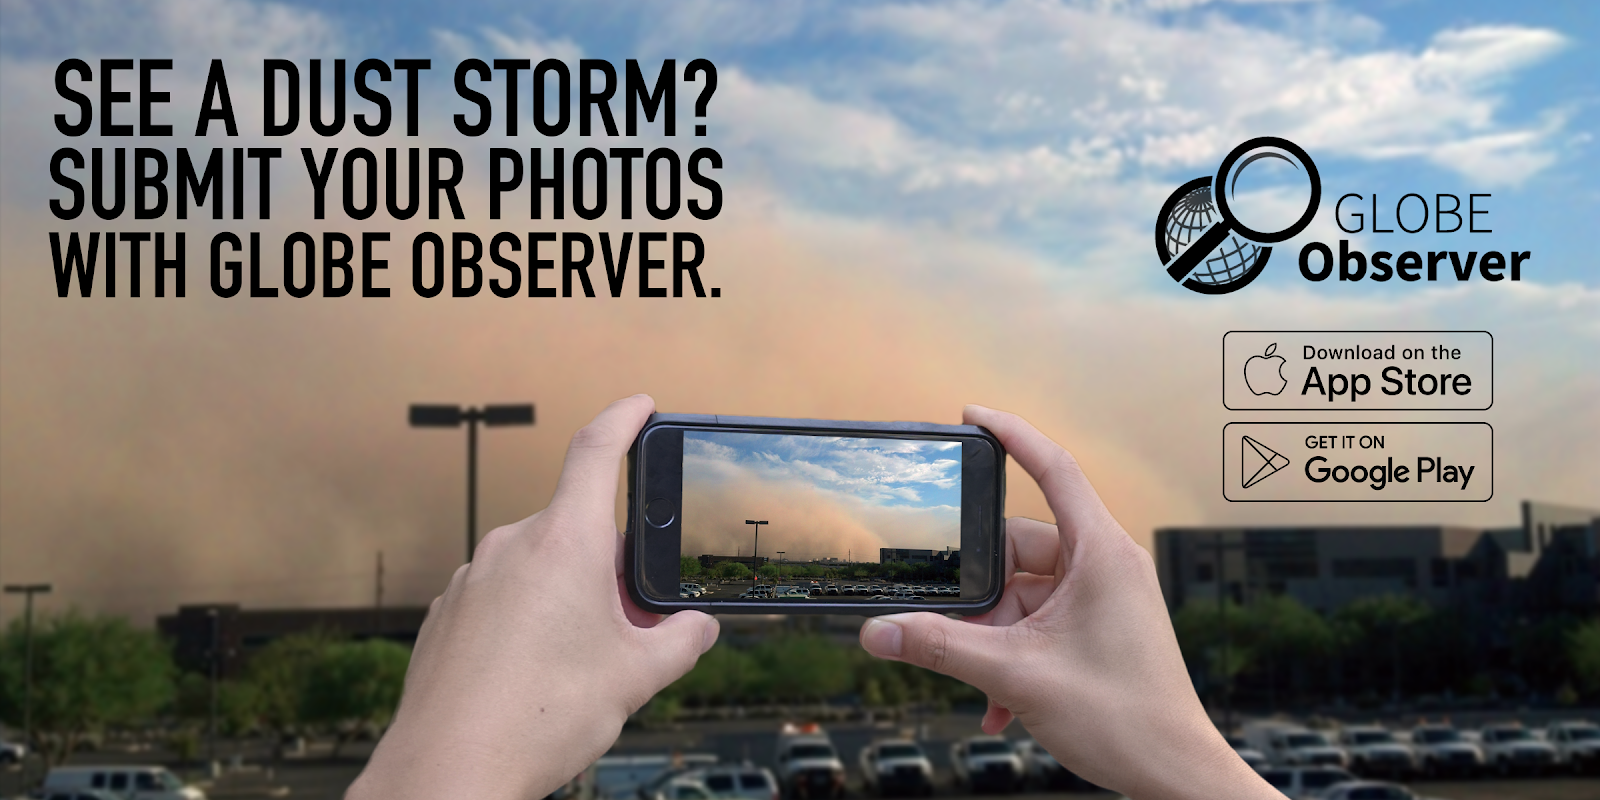 Graphic for GLOBE Observer "See a Dust Storm? Submit Your Photos with GLOBE Observer"